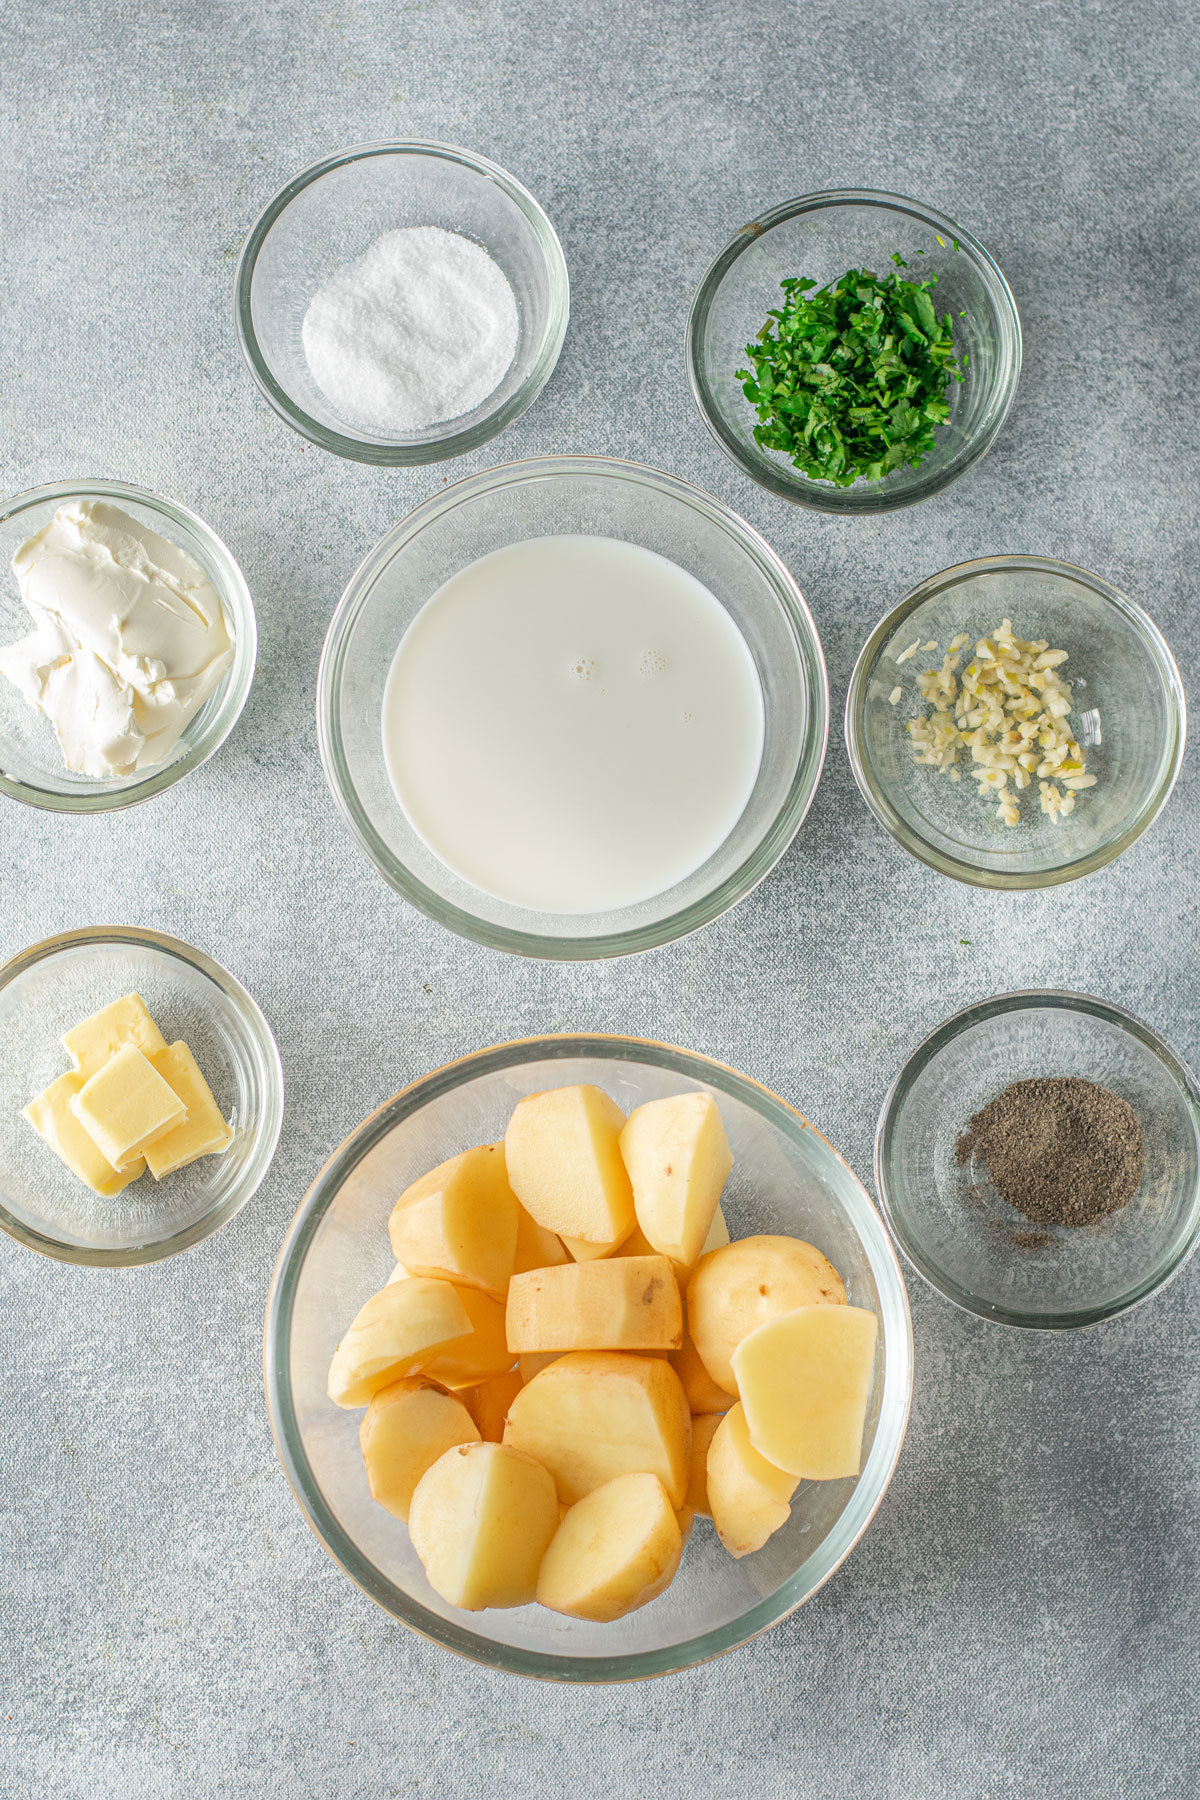 Ingredients of Instant Pot Garlic Mashed Potatoes. These includes potatoes, salt, milk, cream cheese, crushed black pepper, chopped cilantro, water, real butter